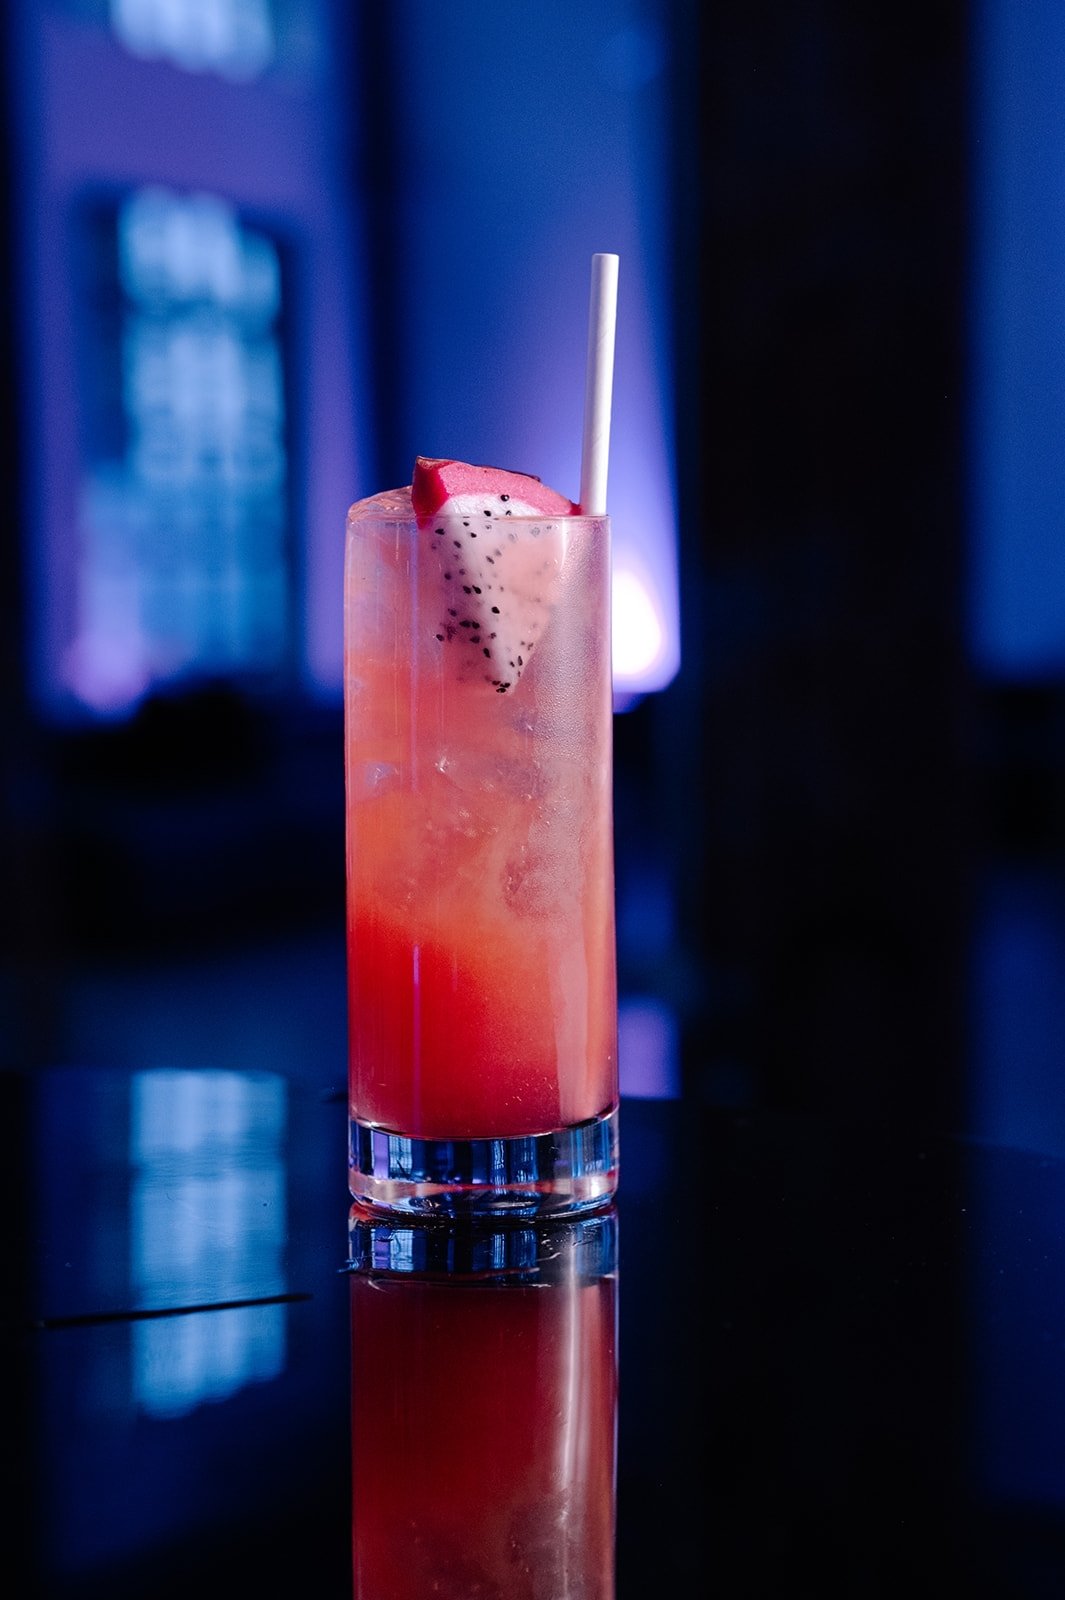 The Papi Chulo is one of our new fave cocktials!
..
tequila, ube syrup, passion fruit, lime, dragon fruit, dragon fruit garnish
..
VENUE SPONSOR: @pipeshop_venue 
CATERING: @edgecaters 
DECOR/FURNITURE RENTALS: @social_ingredients 
PLANNER/CREATIVE D